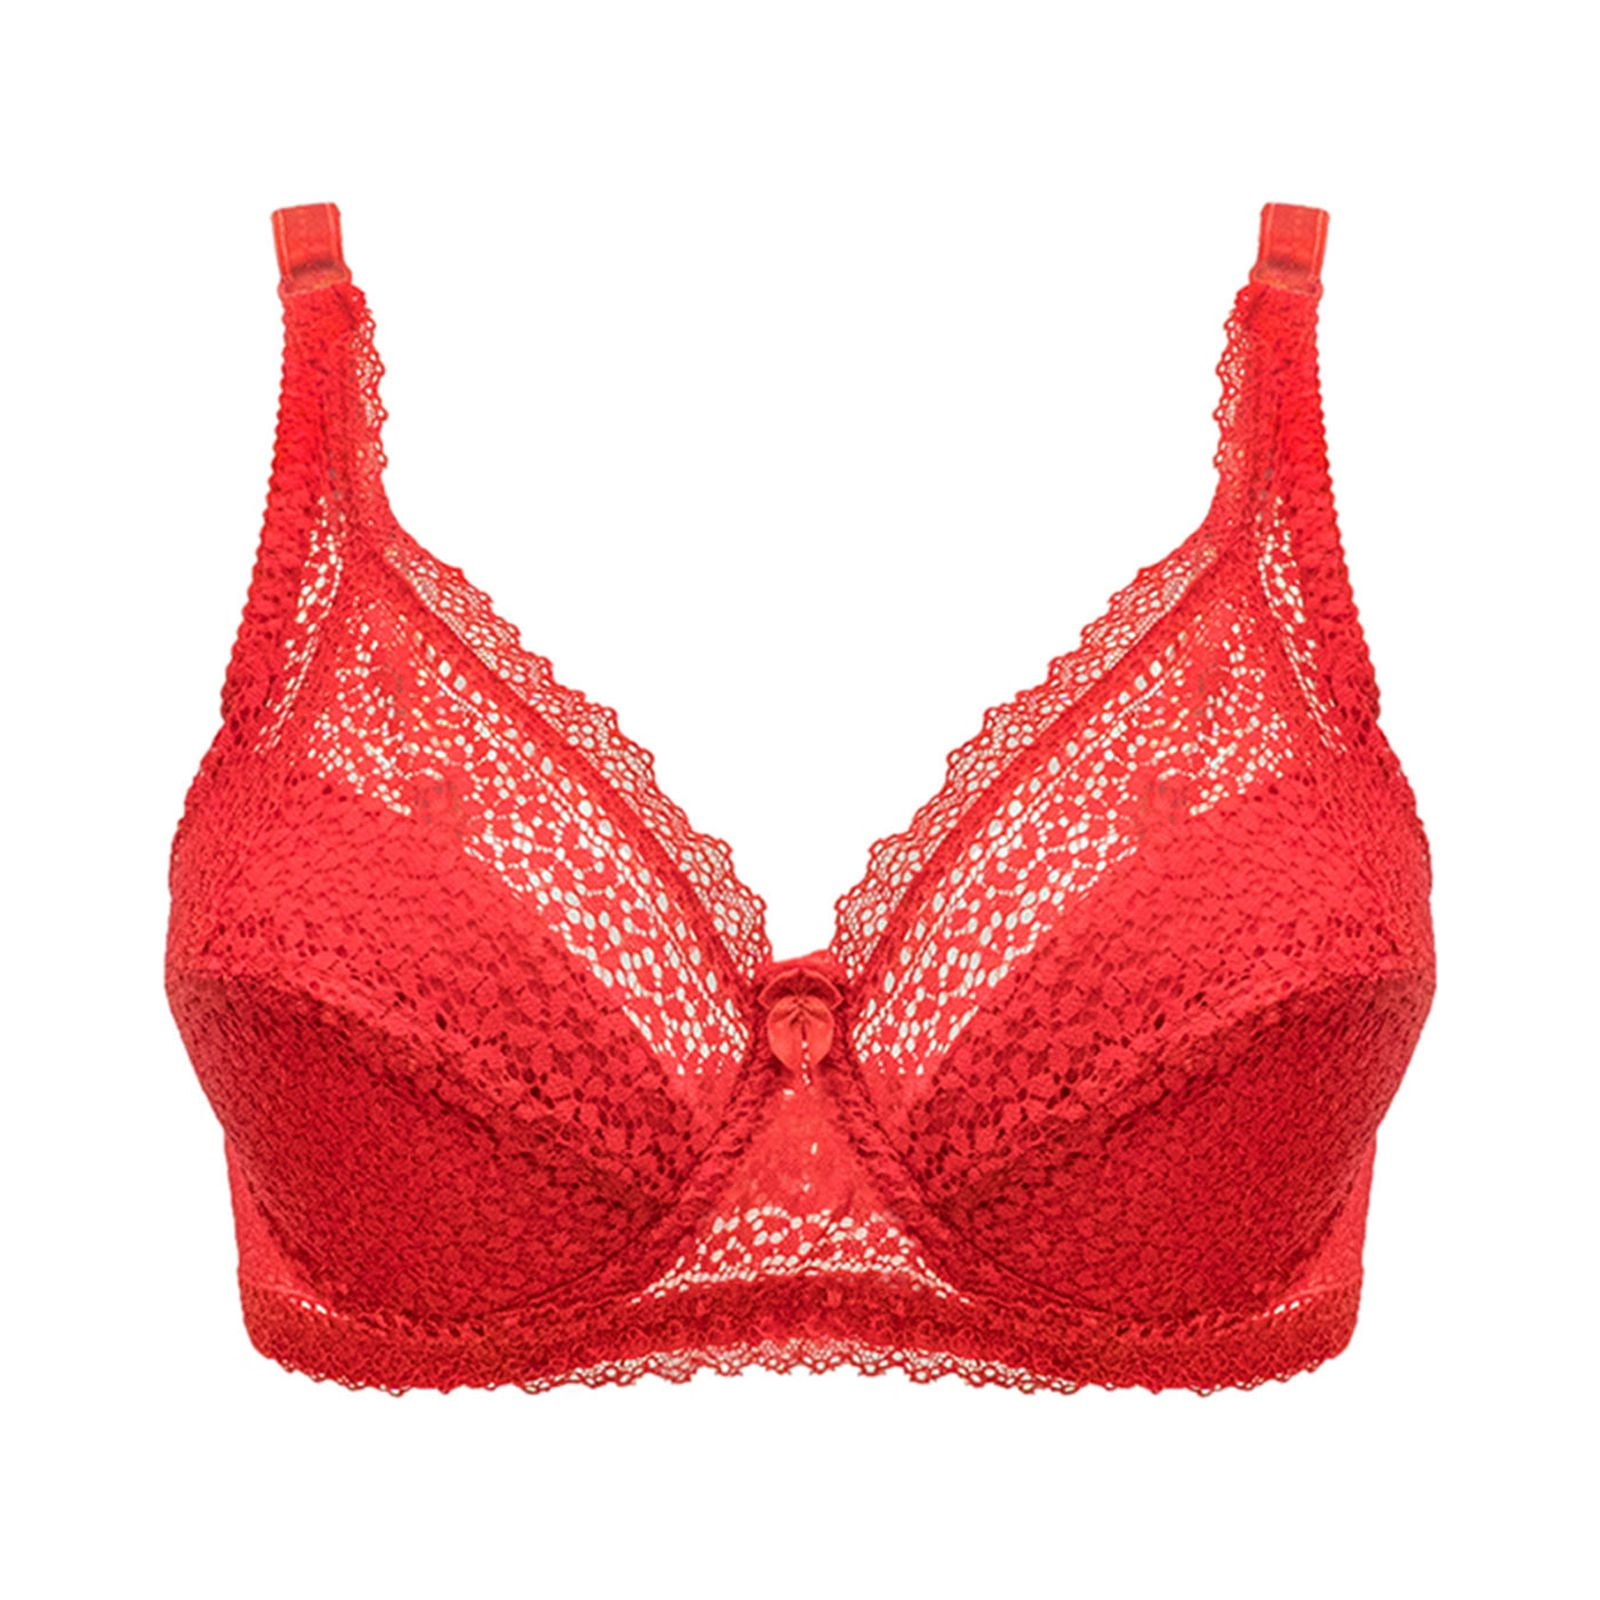 Cacique Red Lace Bra Nude Base Bra 40 DDD Lt Padded Molded Cup Plunge